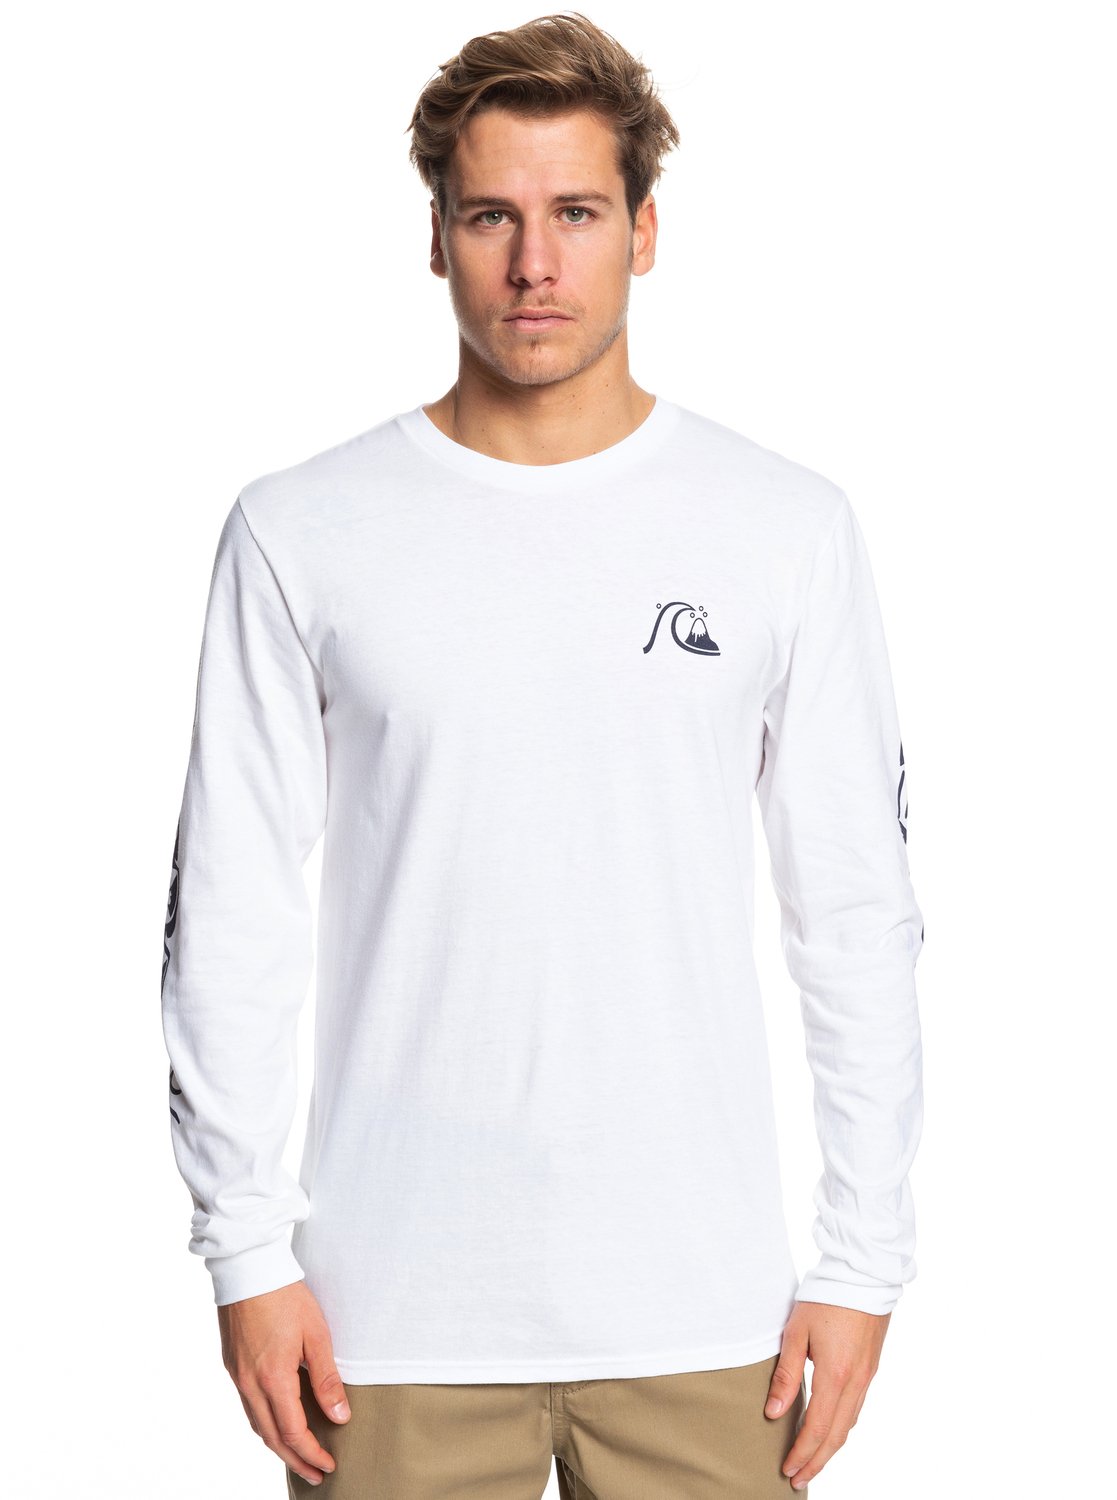 Quiksilver Too Many Rules Tee WBB0 M